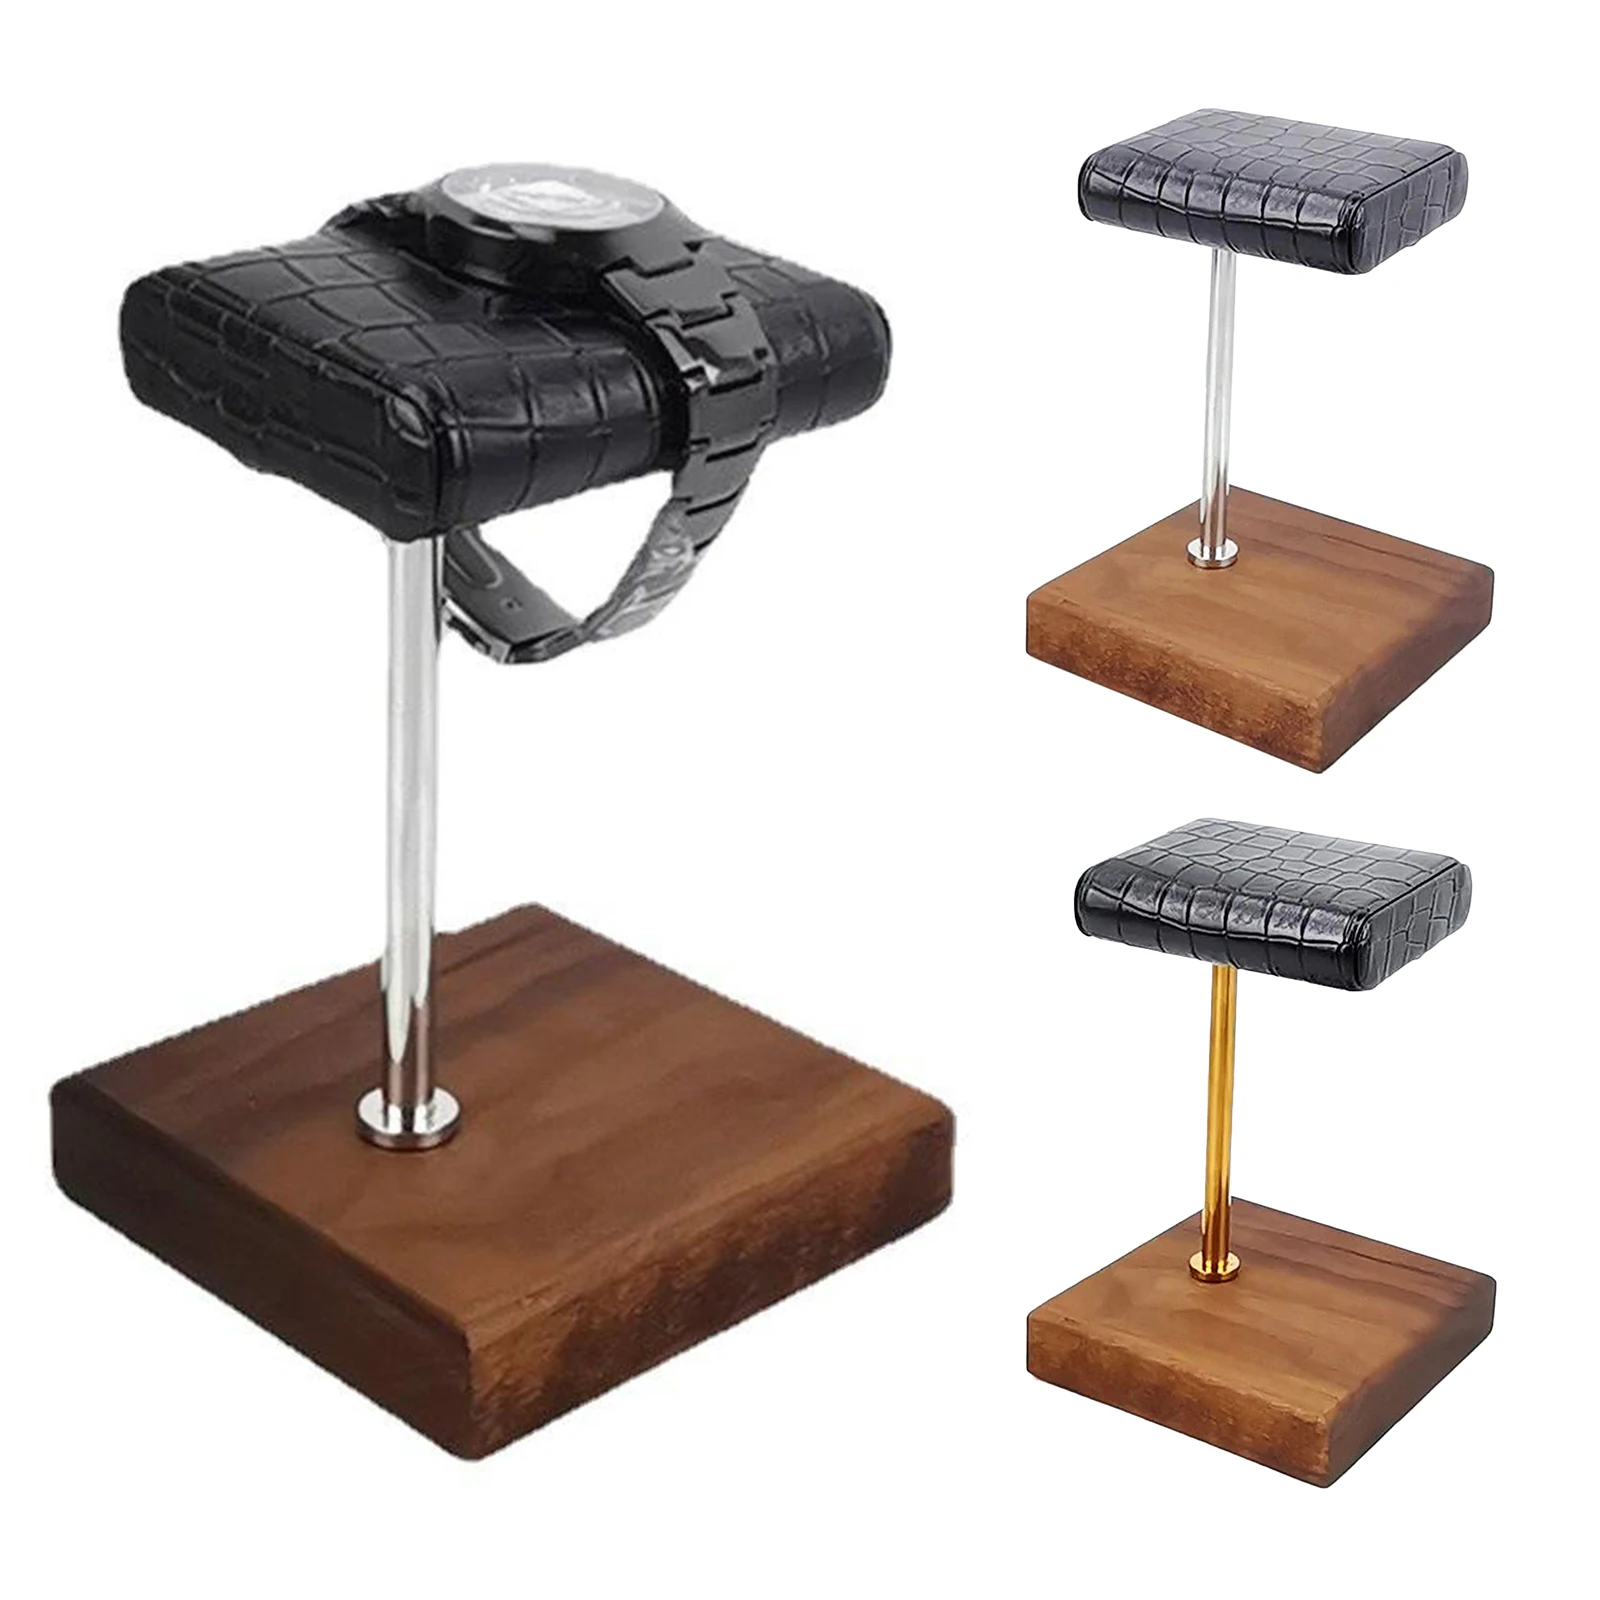 Handcrafted Leather & Marble Watch Display Stand, Home Use or Portable for Travel, Business Trip,  to Rest and Store 